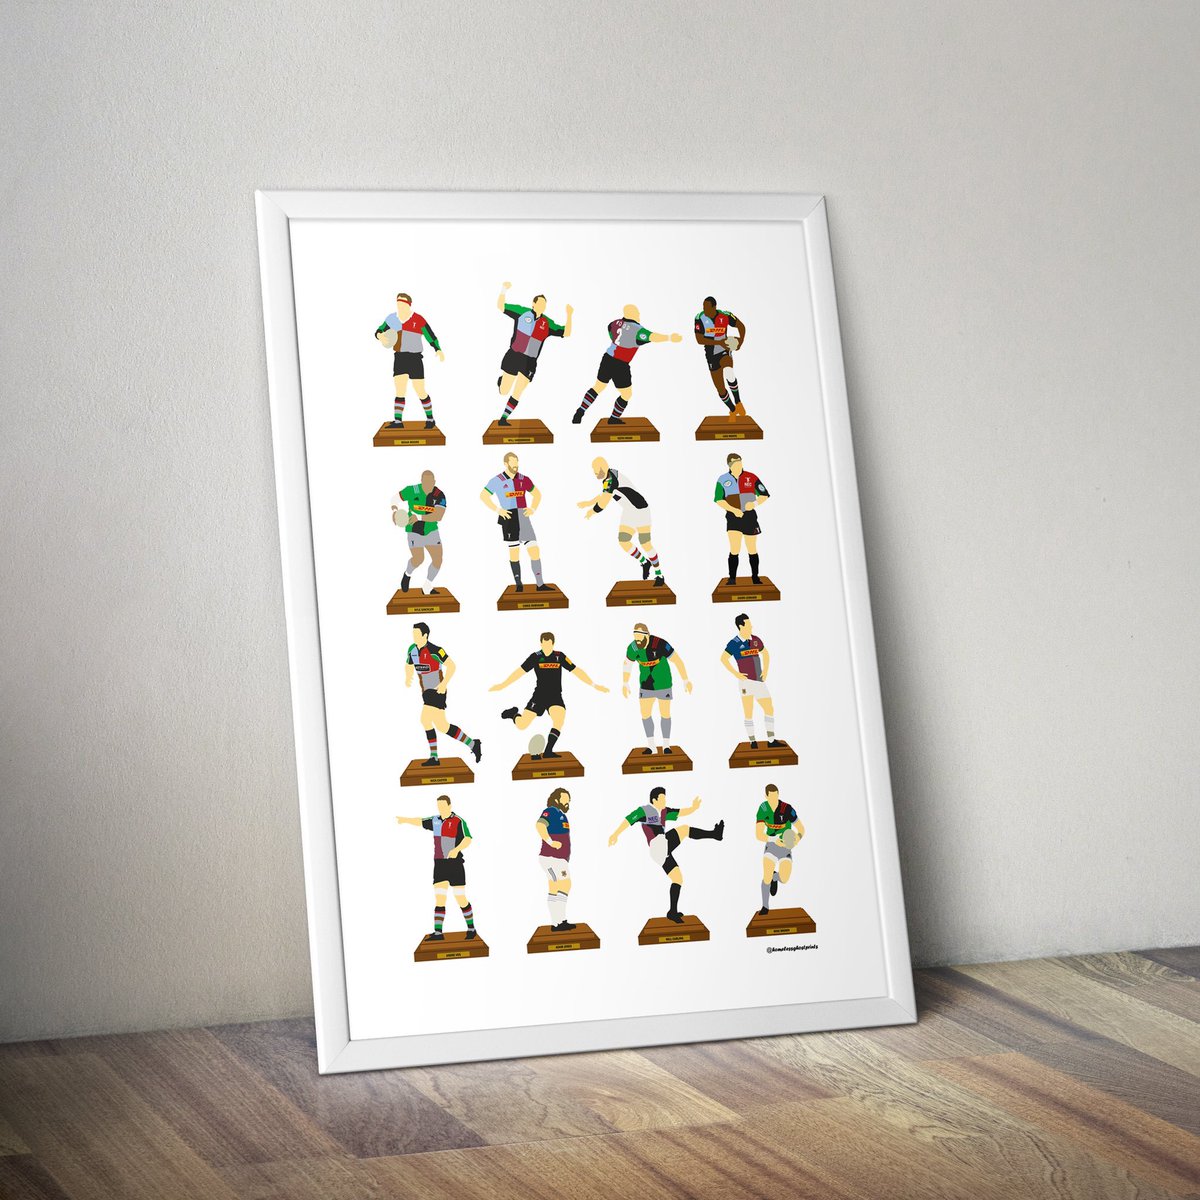 #Harlequins We’ve teamed up with @PrintsGhost to win this excellent legends squad print. Simply: 1️⃣Retweet 2️⃣Tag a fan 3️⃣Follow @PrintsGhost Winner announced Sunday 19th July